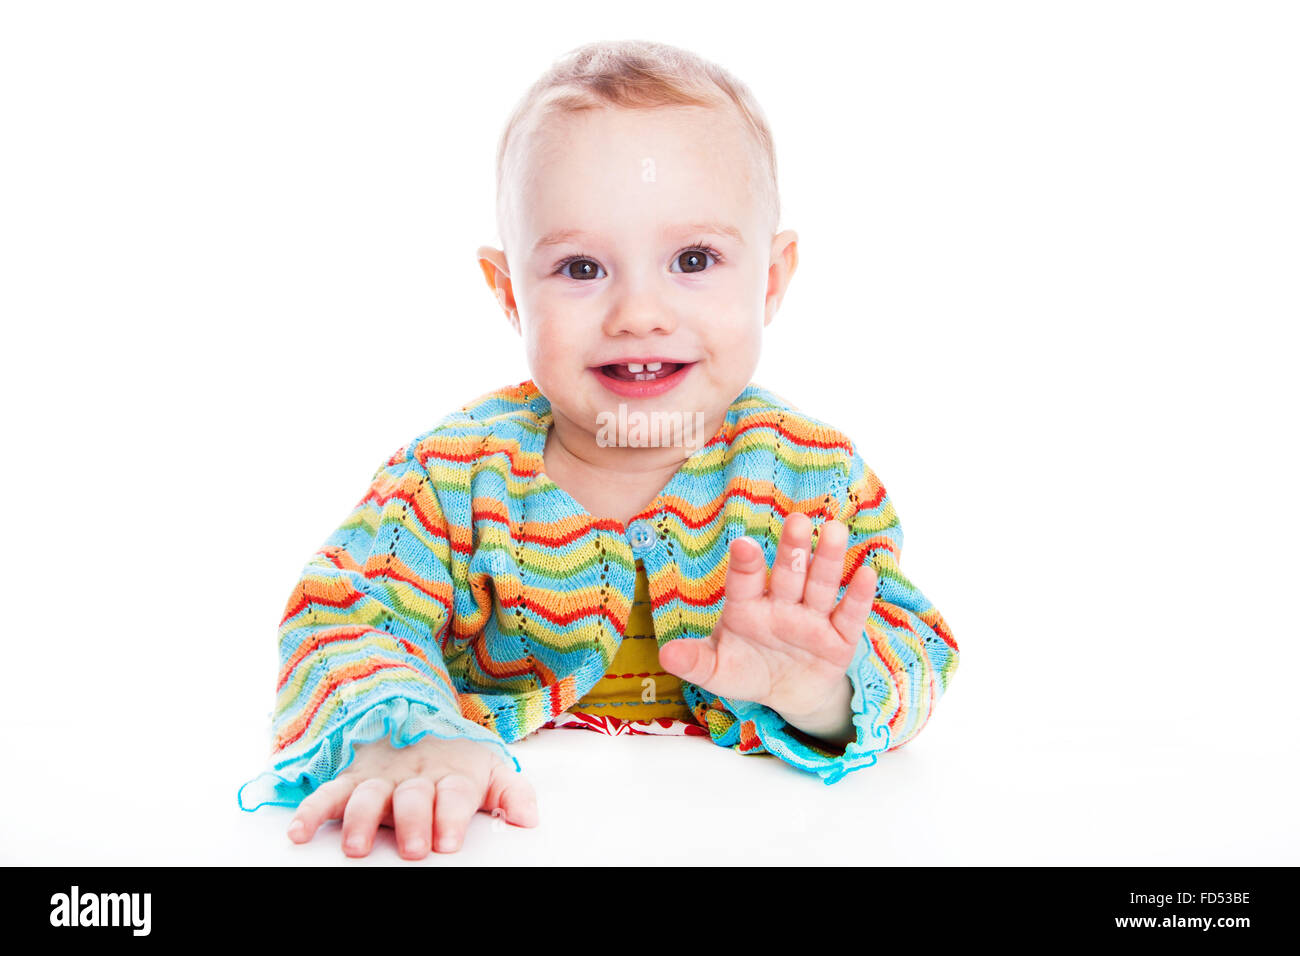 Cute baby girl smiling Stock Photo